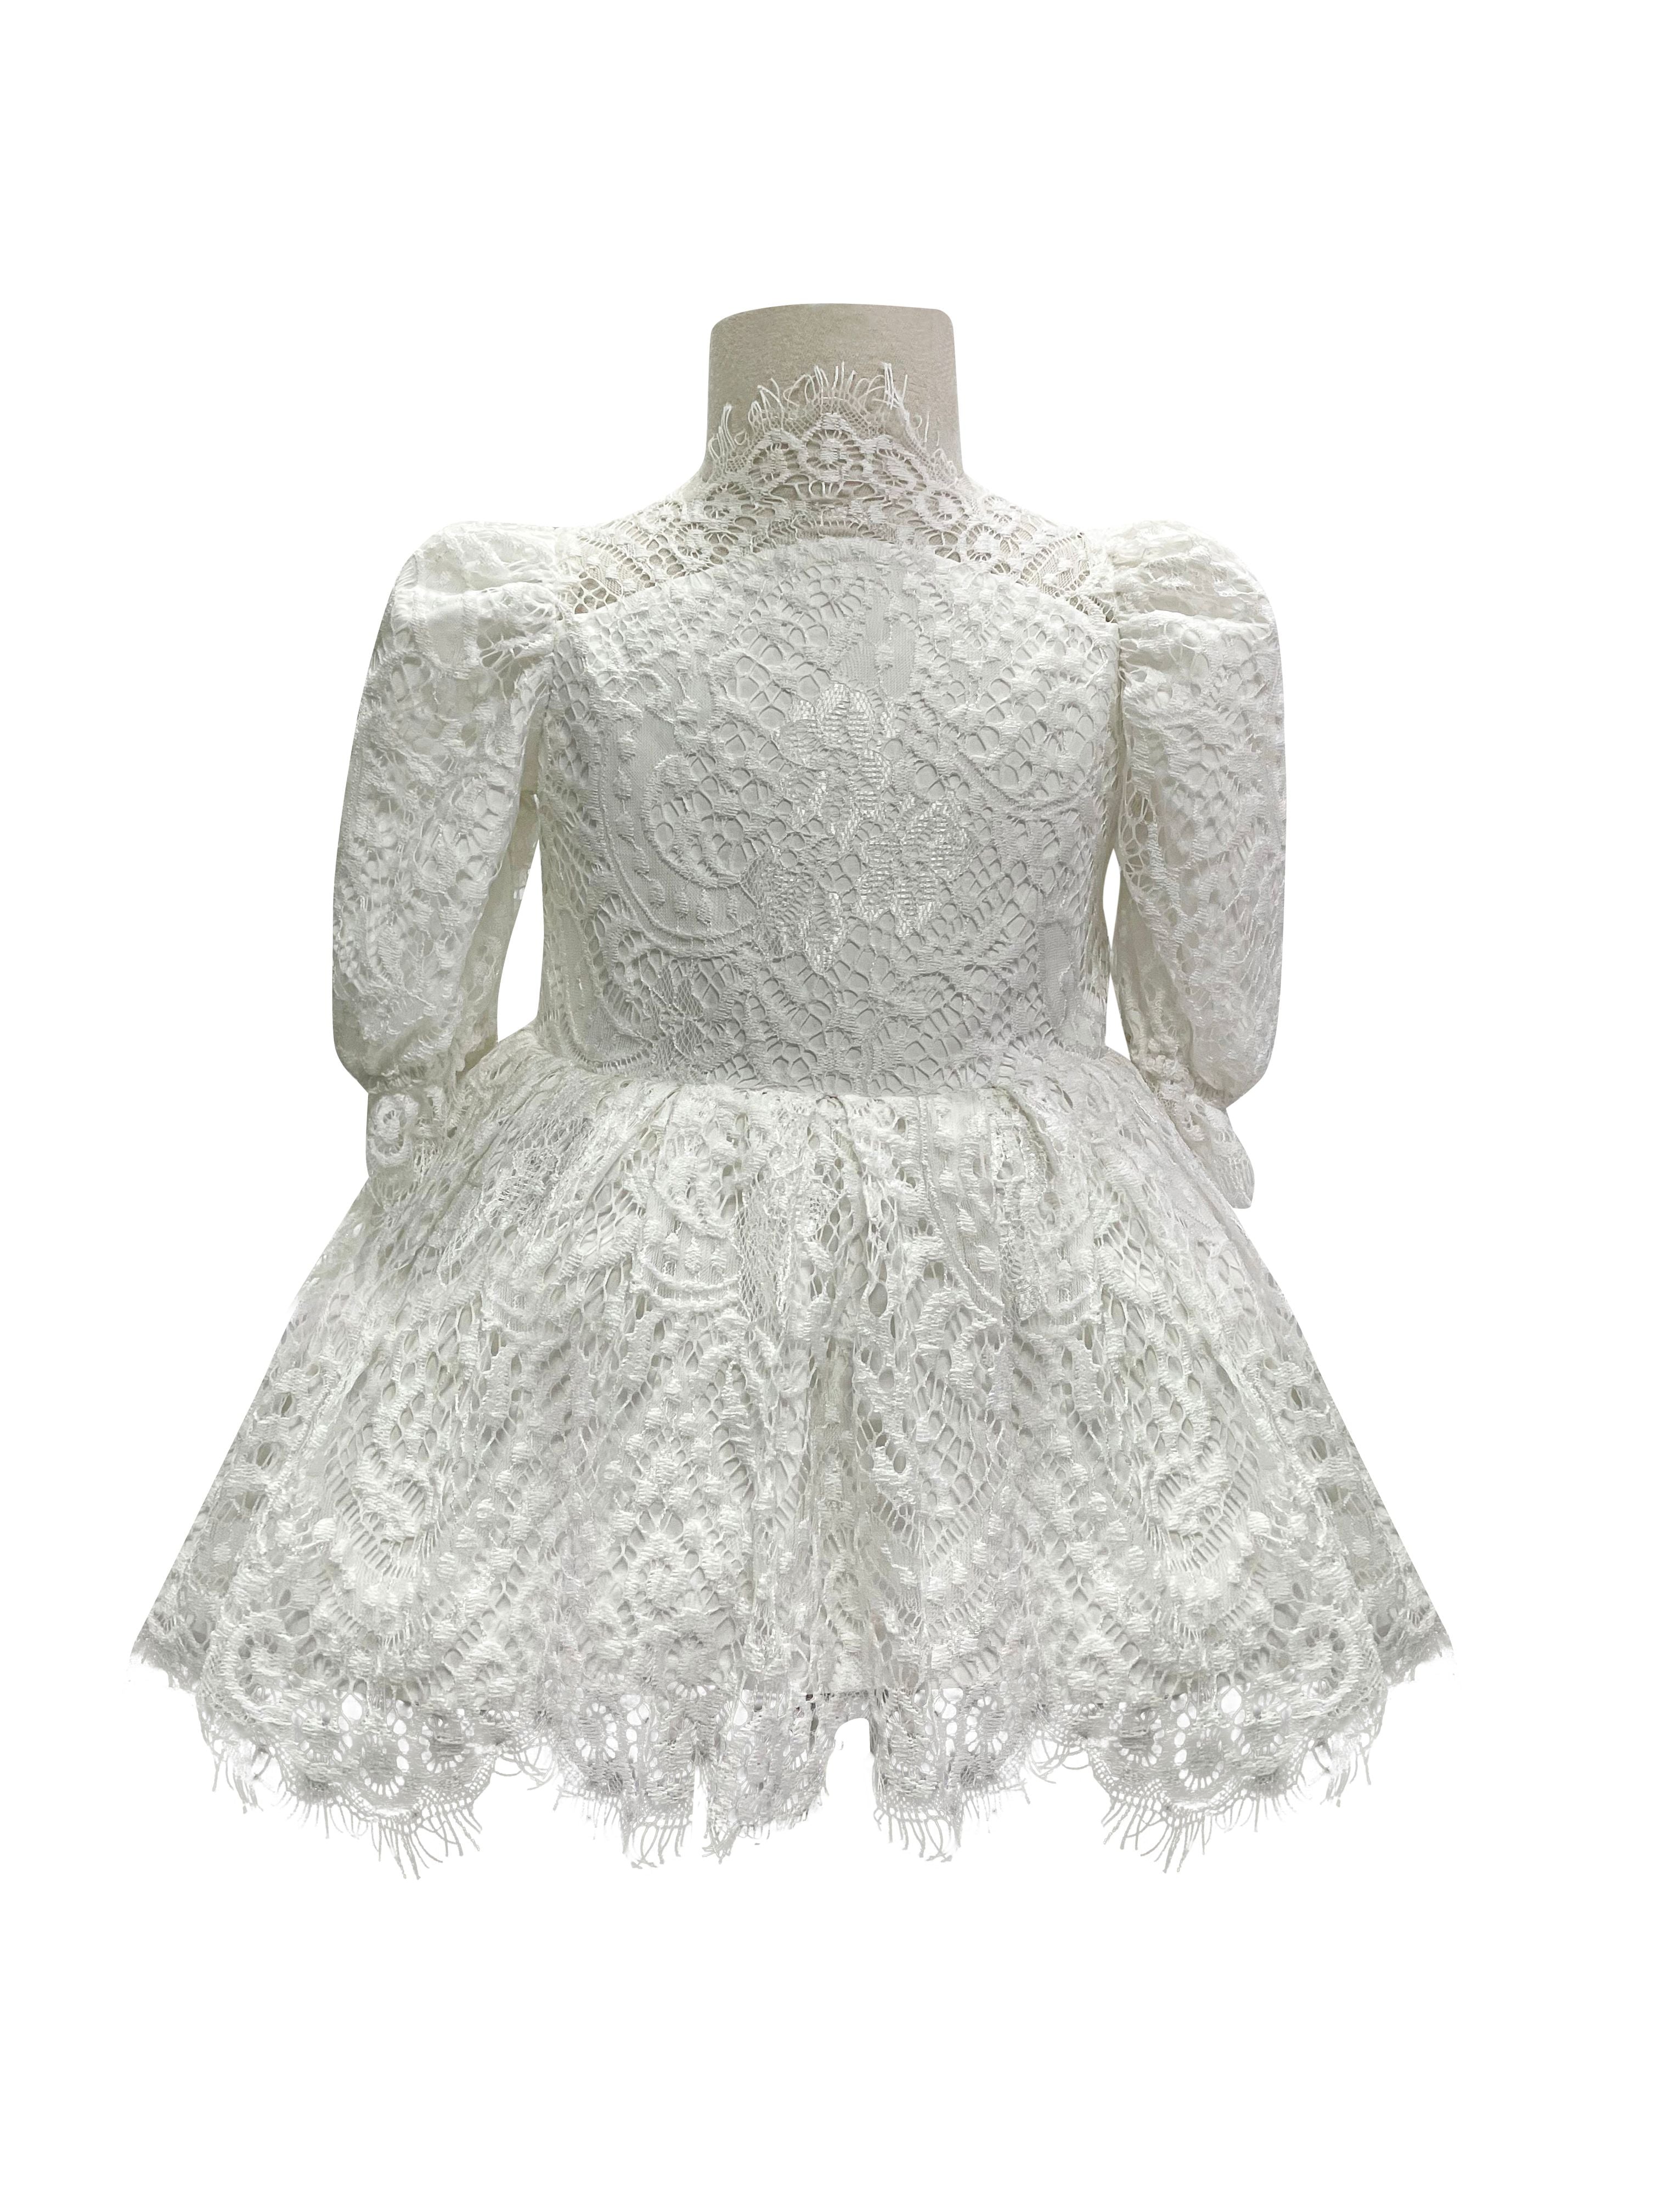 The Audrey Full Sleeved Lace Dress